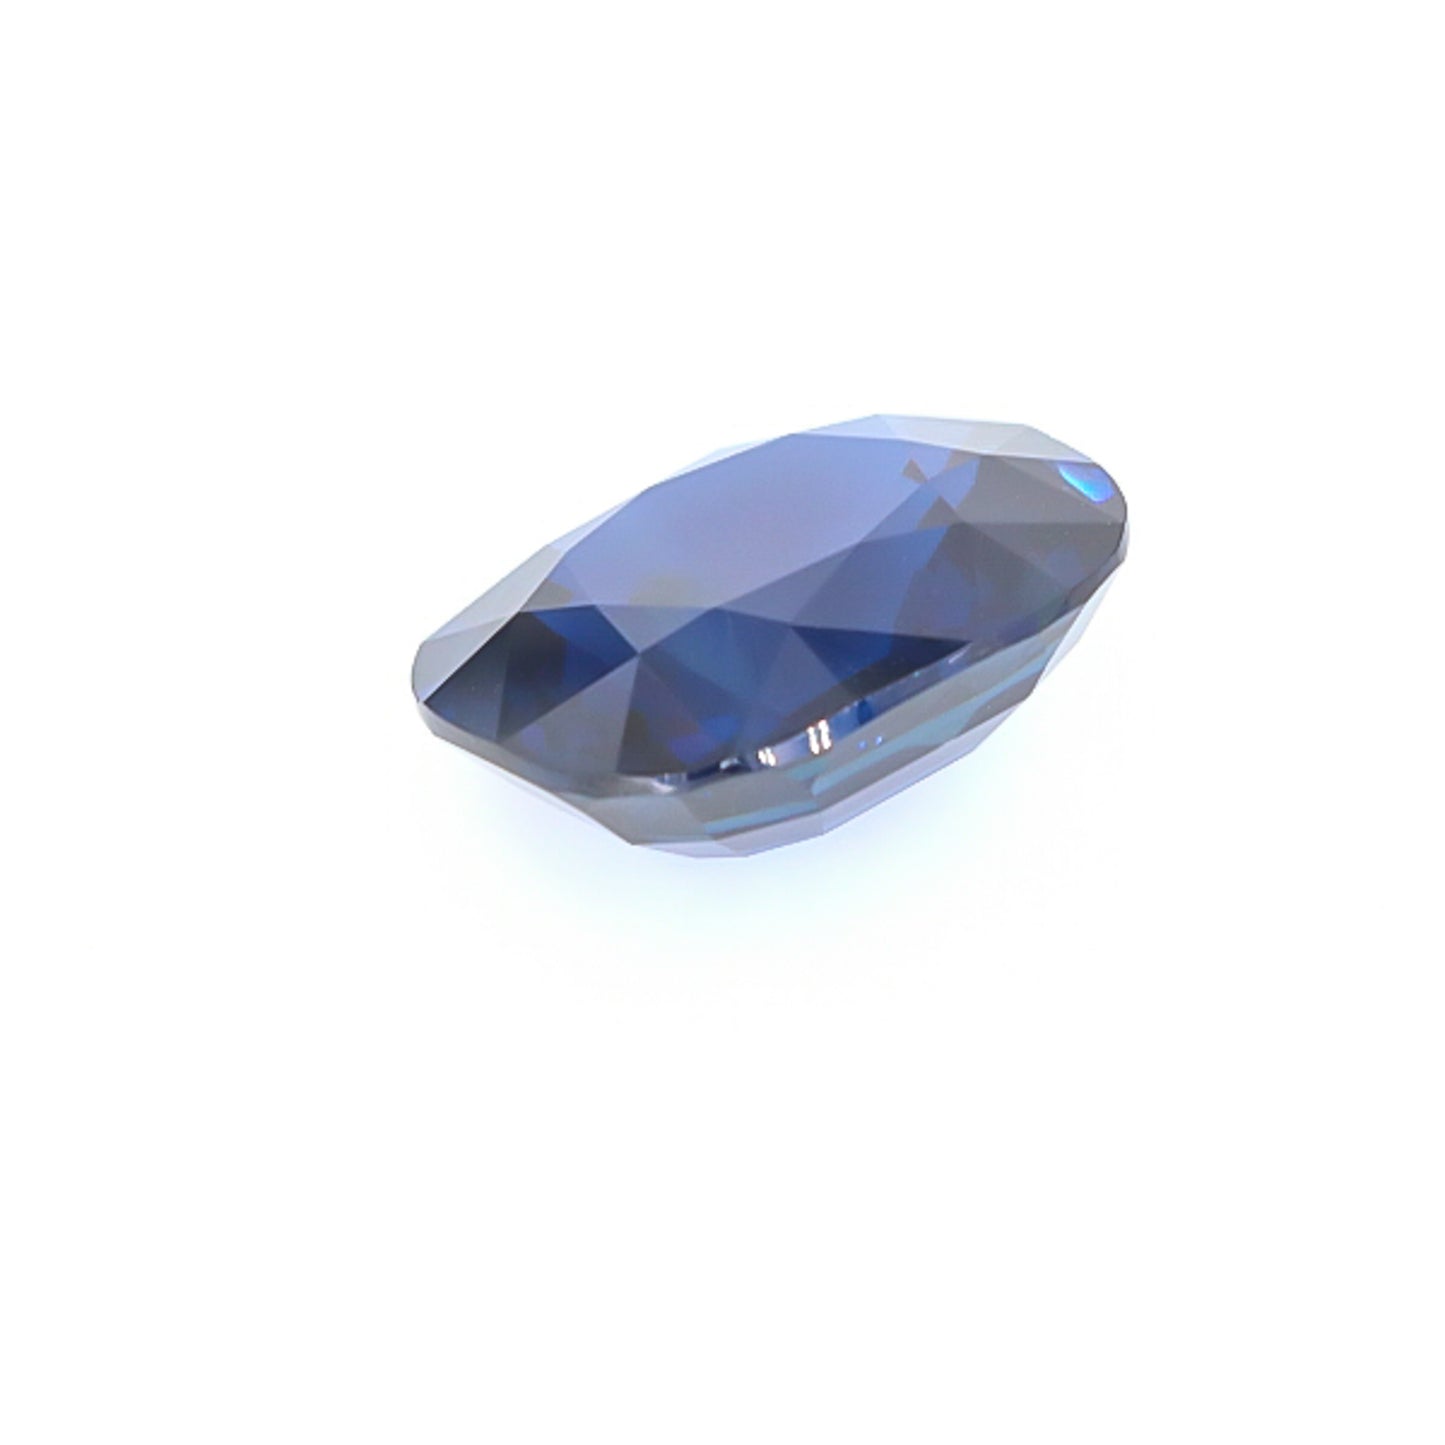 Natural Blue Sapphire 19.11 Carats with Gubelin Gem Lab Report